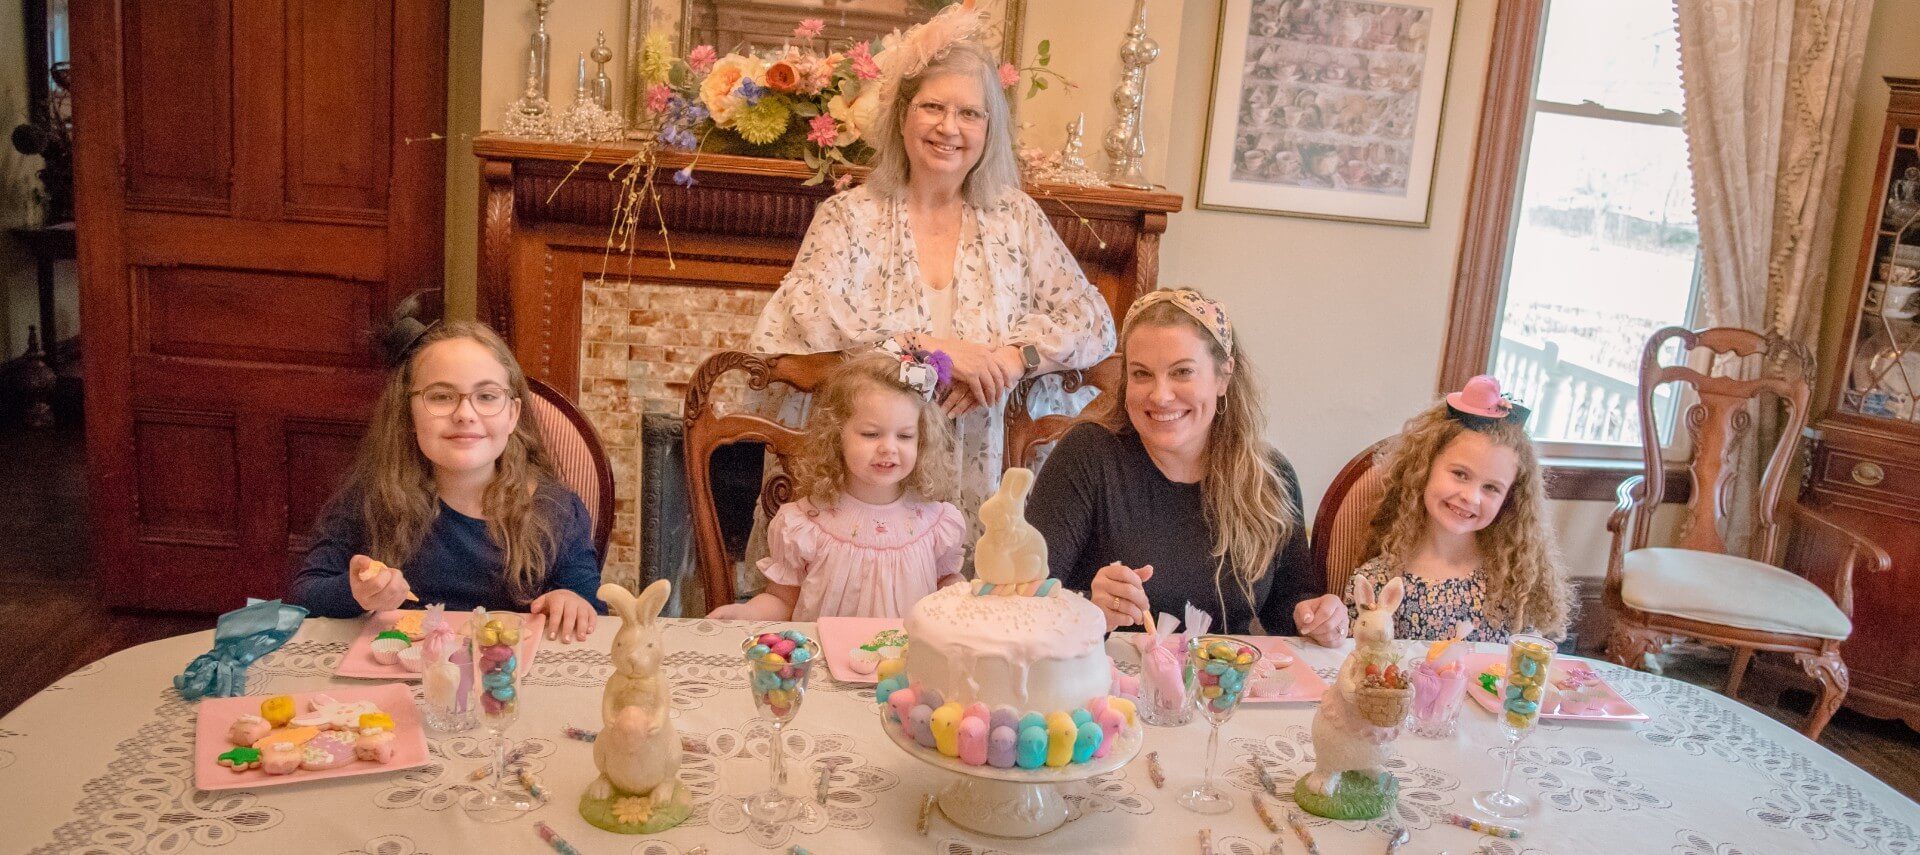 Woman poses behind a family of four female guests decorating cookies at a spring tea party